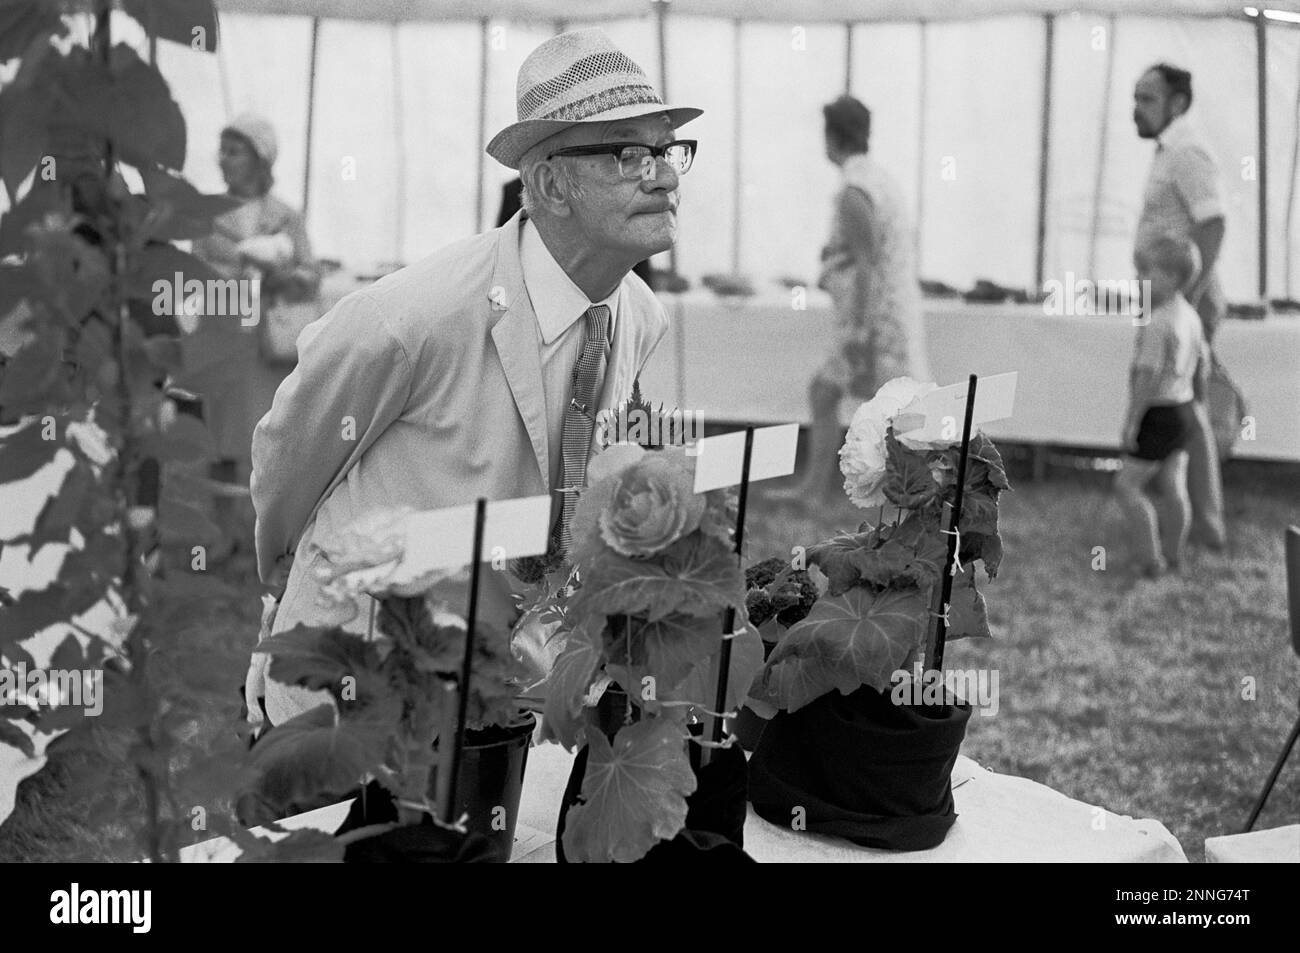 A man admiring the exhibits at a flower show, Llanfrechfa, Wales, 1976 Stock Photo